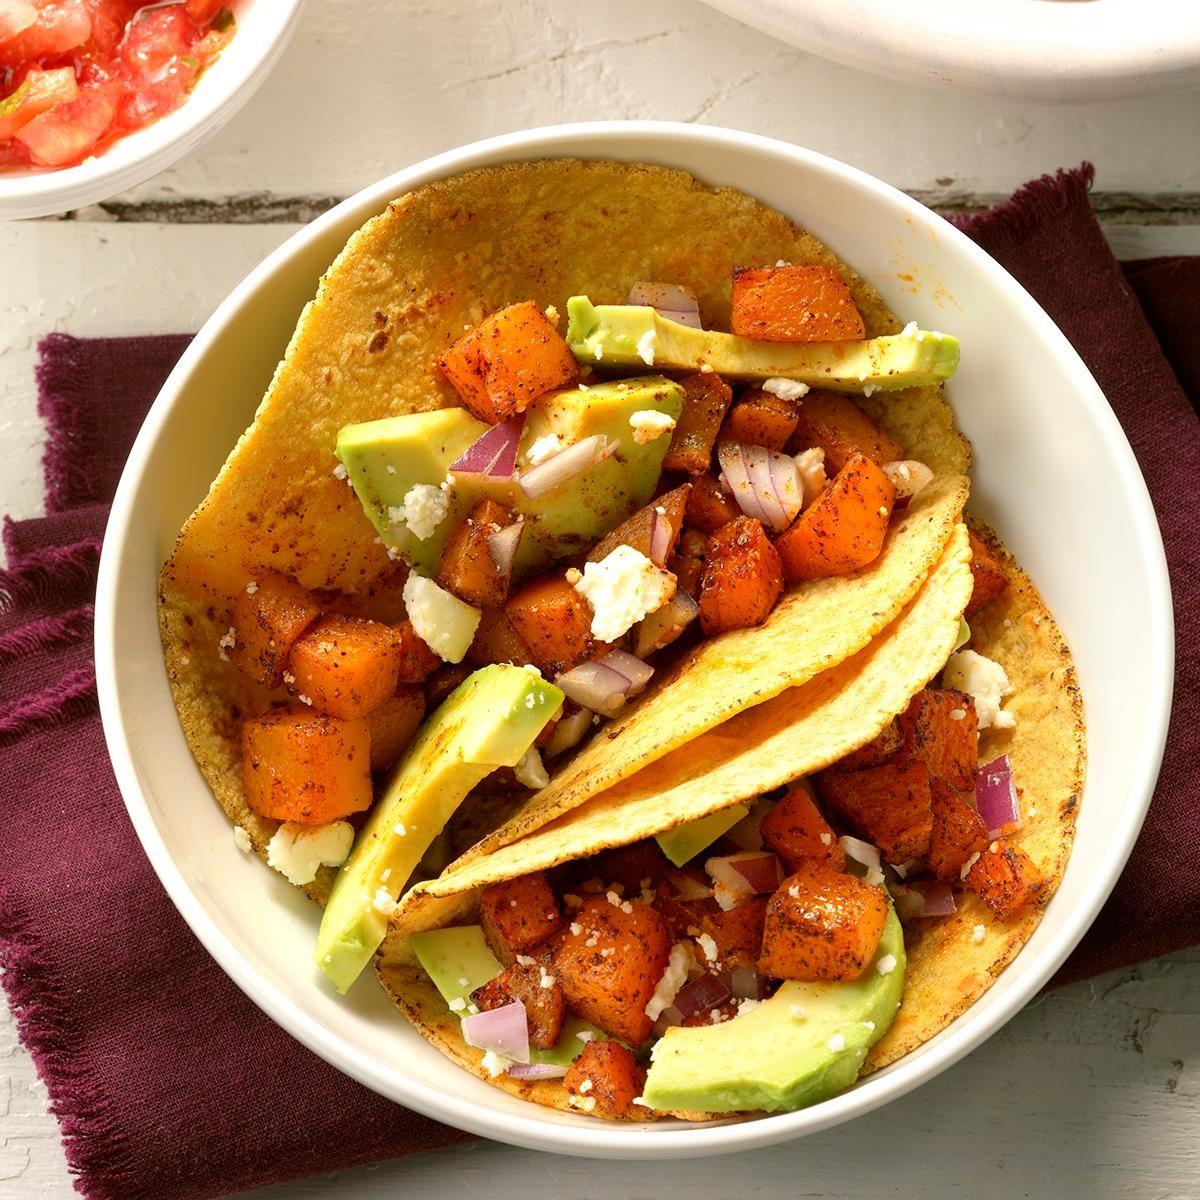 Day 6: Roasted Butternut Squash Tacos